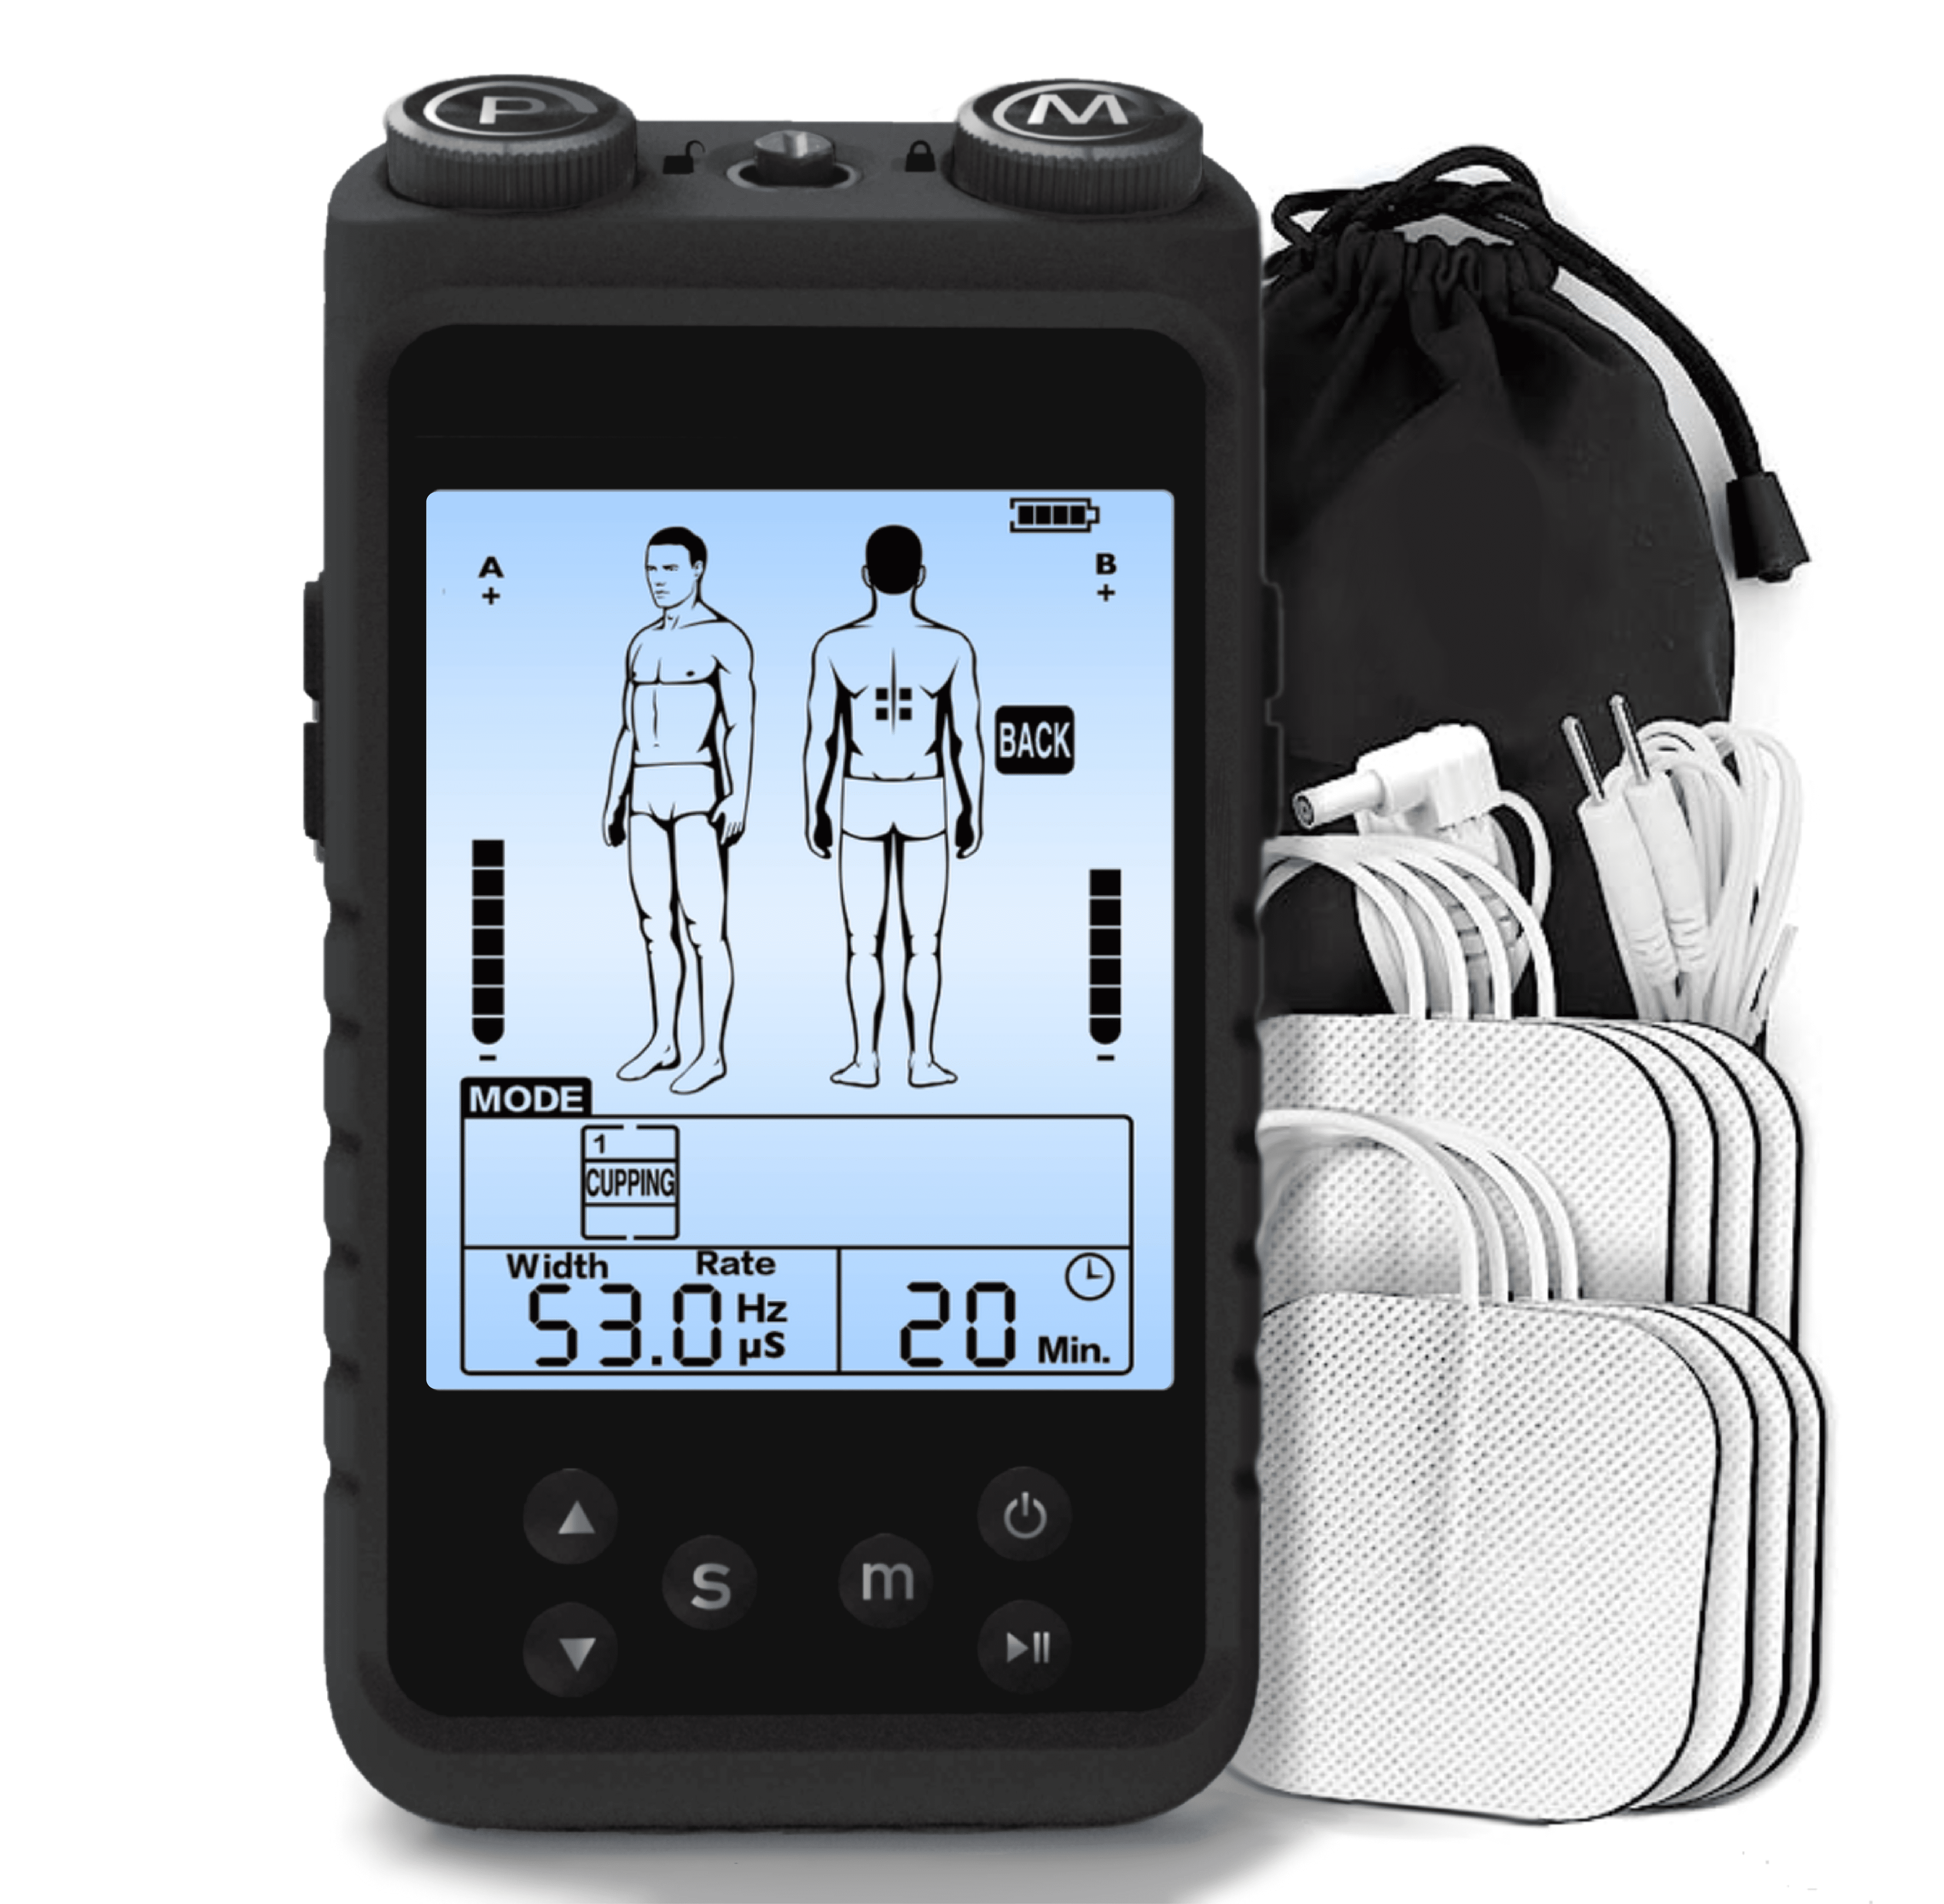 VPOD Tens Unit Muscle Stimulator. Wireless Tens Unit for Pain Relief  Therapy of Sciatica, Back Pain, Neck Pain, Nerve Pain. Rechargeable Tens  Machine